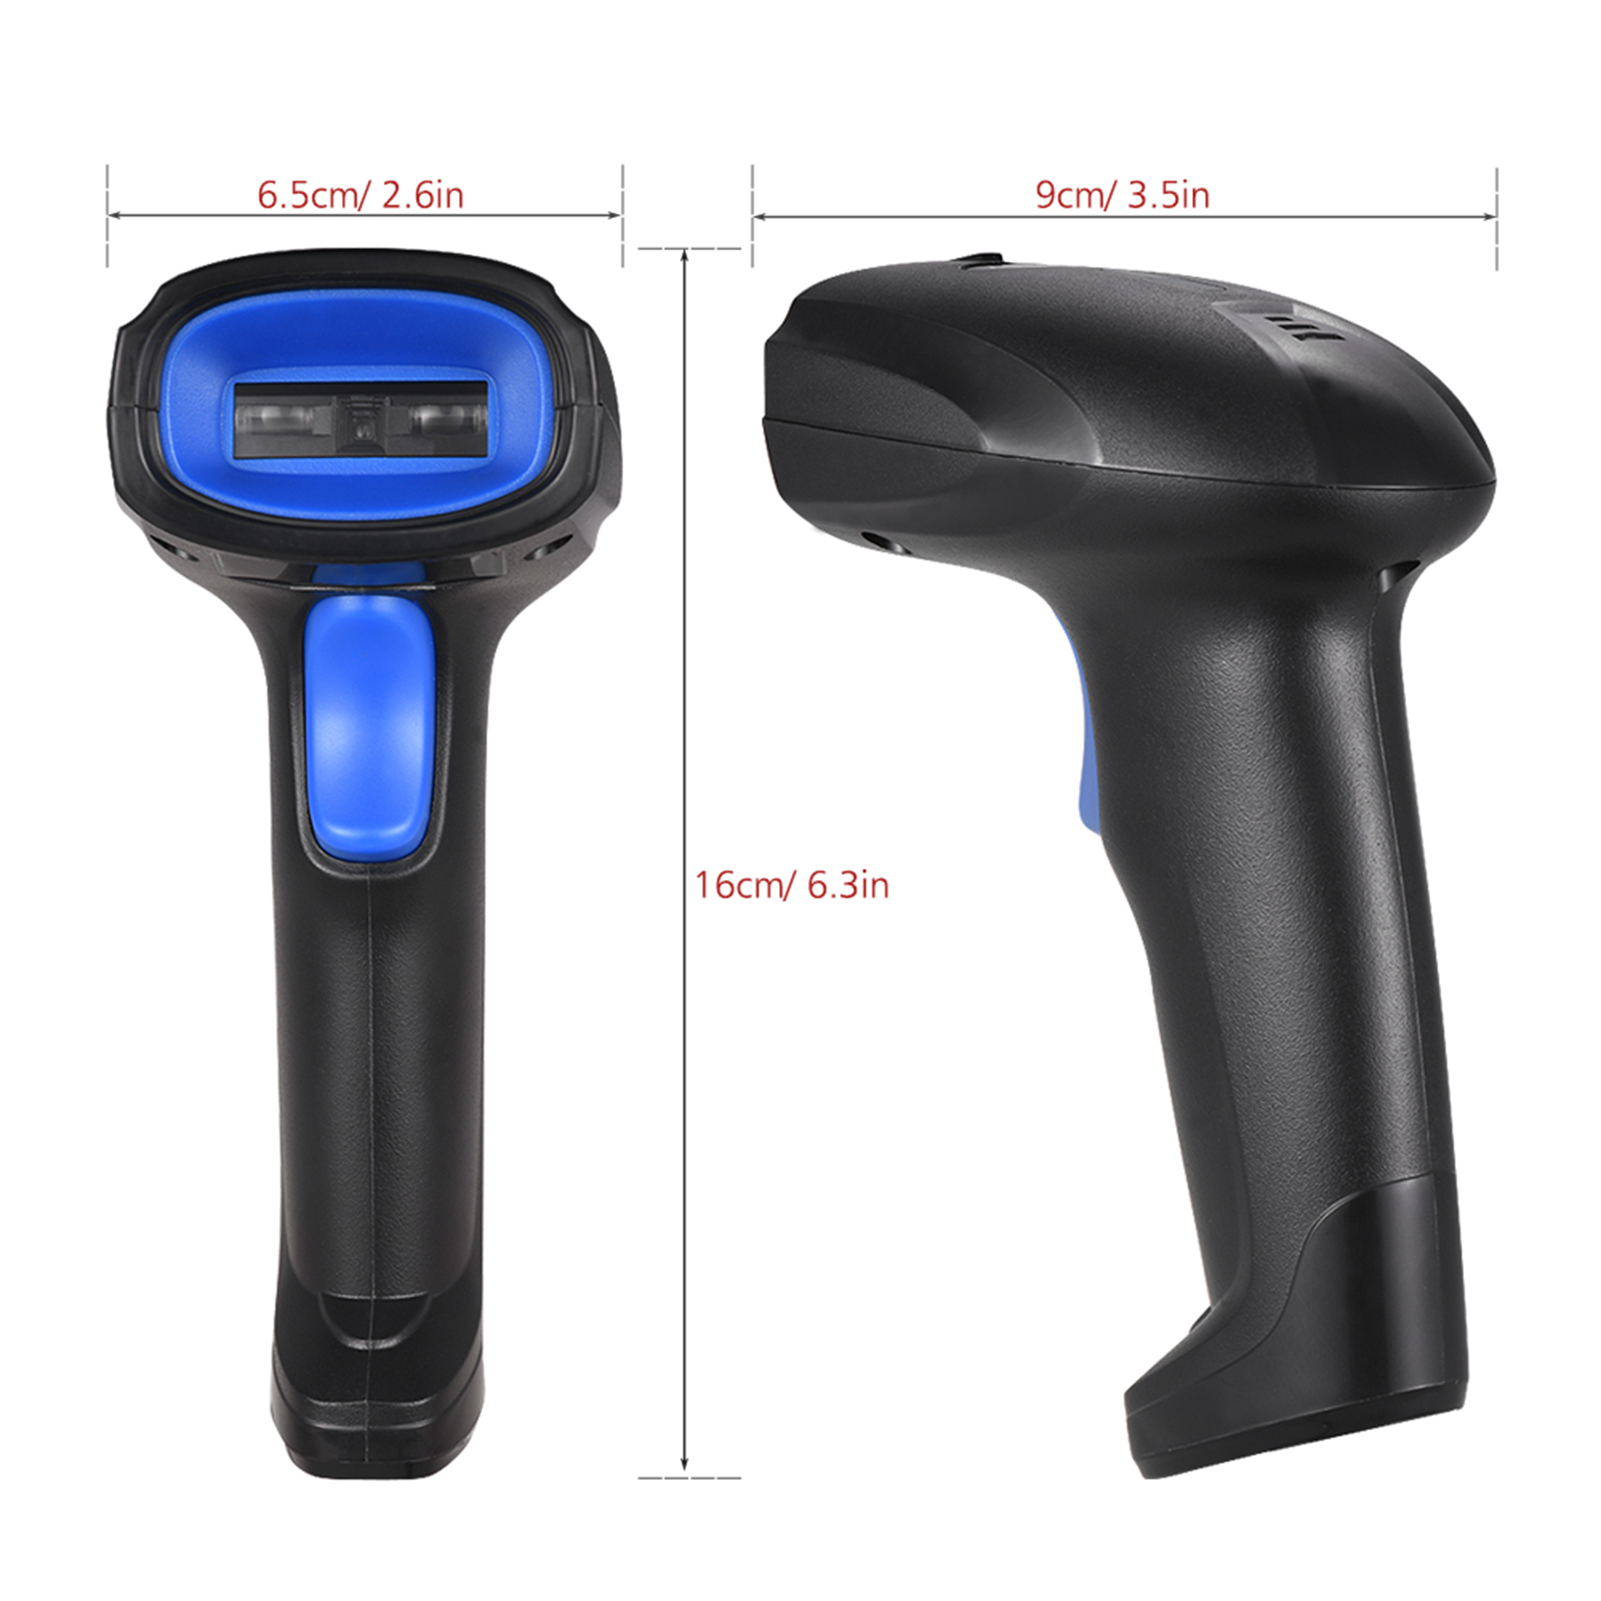 Andoer Handheld CCD Automatic USB Wired 1D Bar Code Reader for Mobile Payment Computer Screen Scan - image 4 of 7